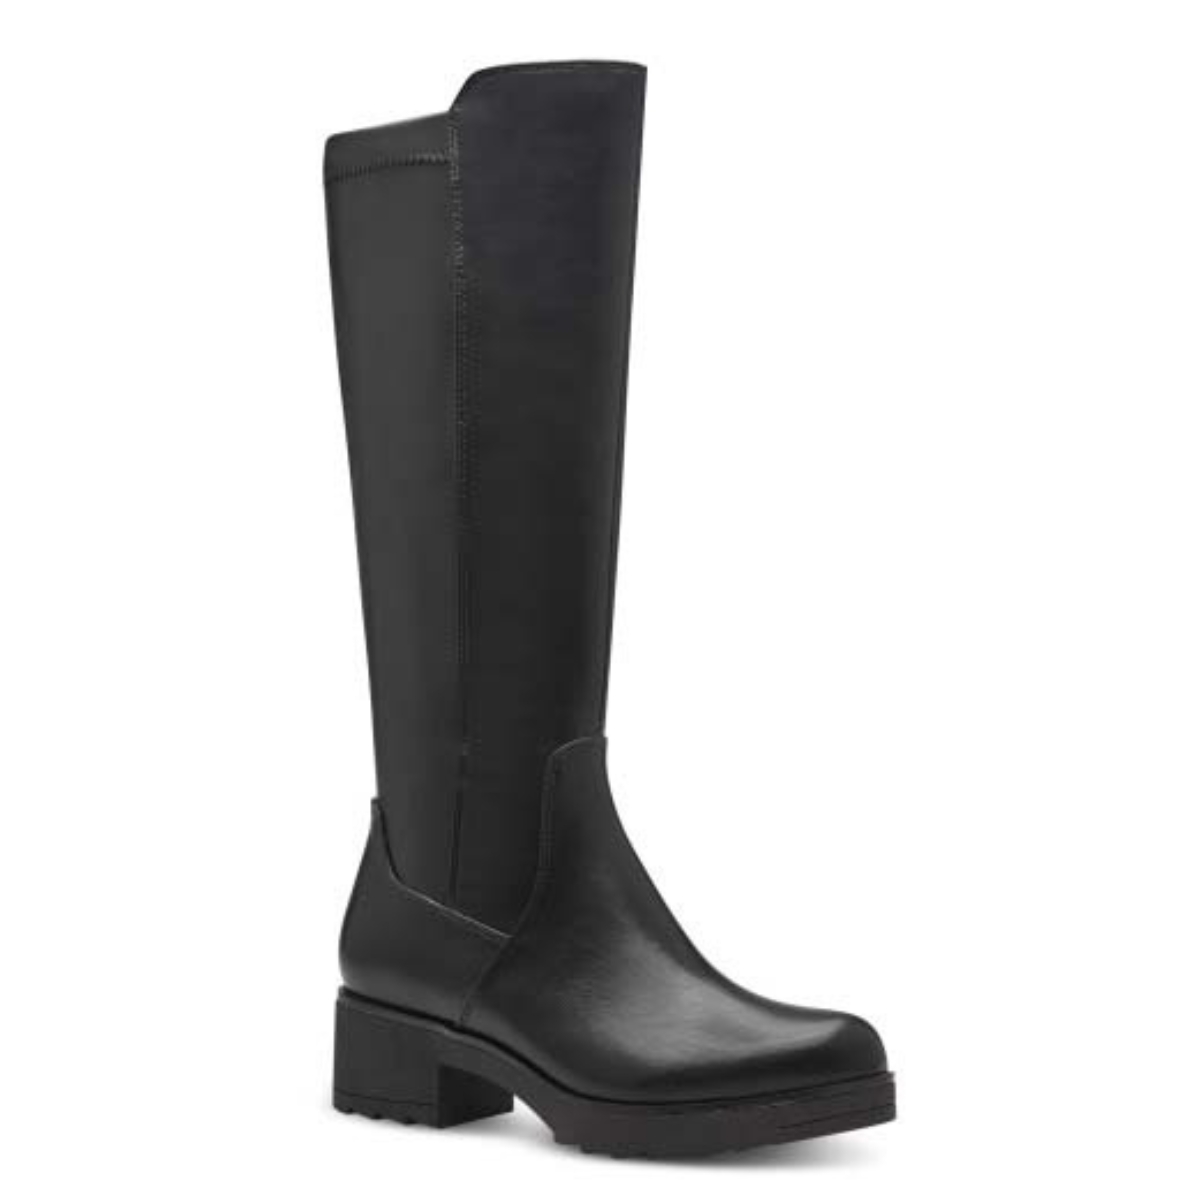 Marco Tozzi Dono Long Black Womens Knee-High Boots 25606-41-001 In Size 41 In Plain Black